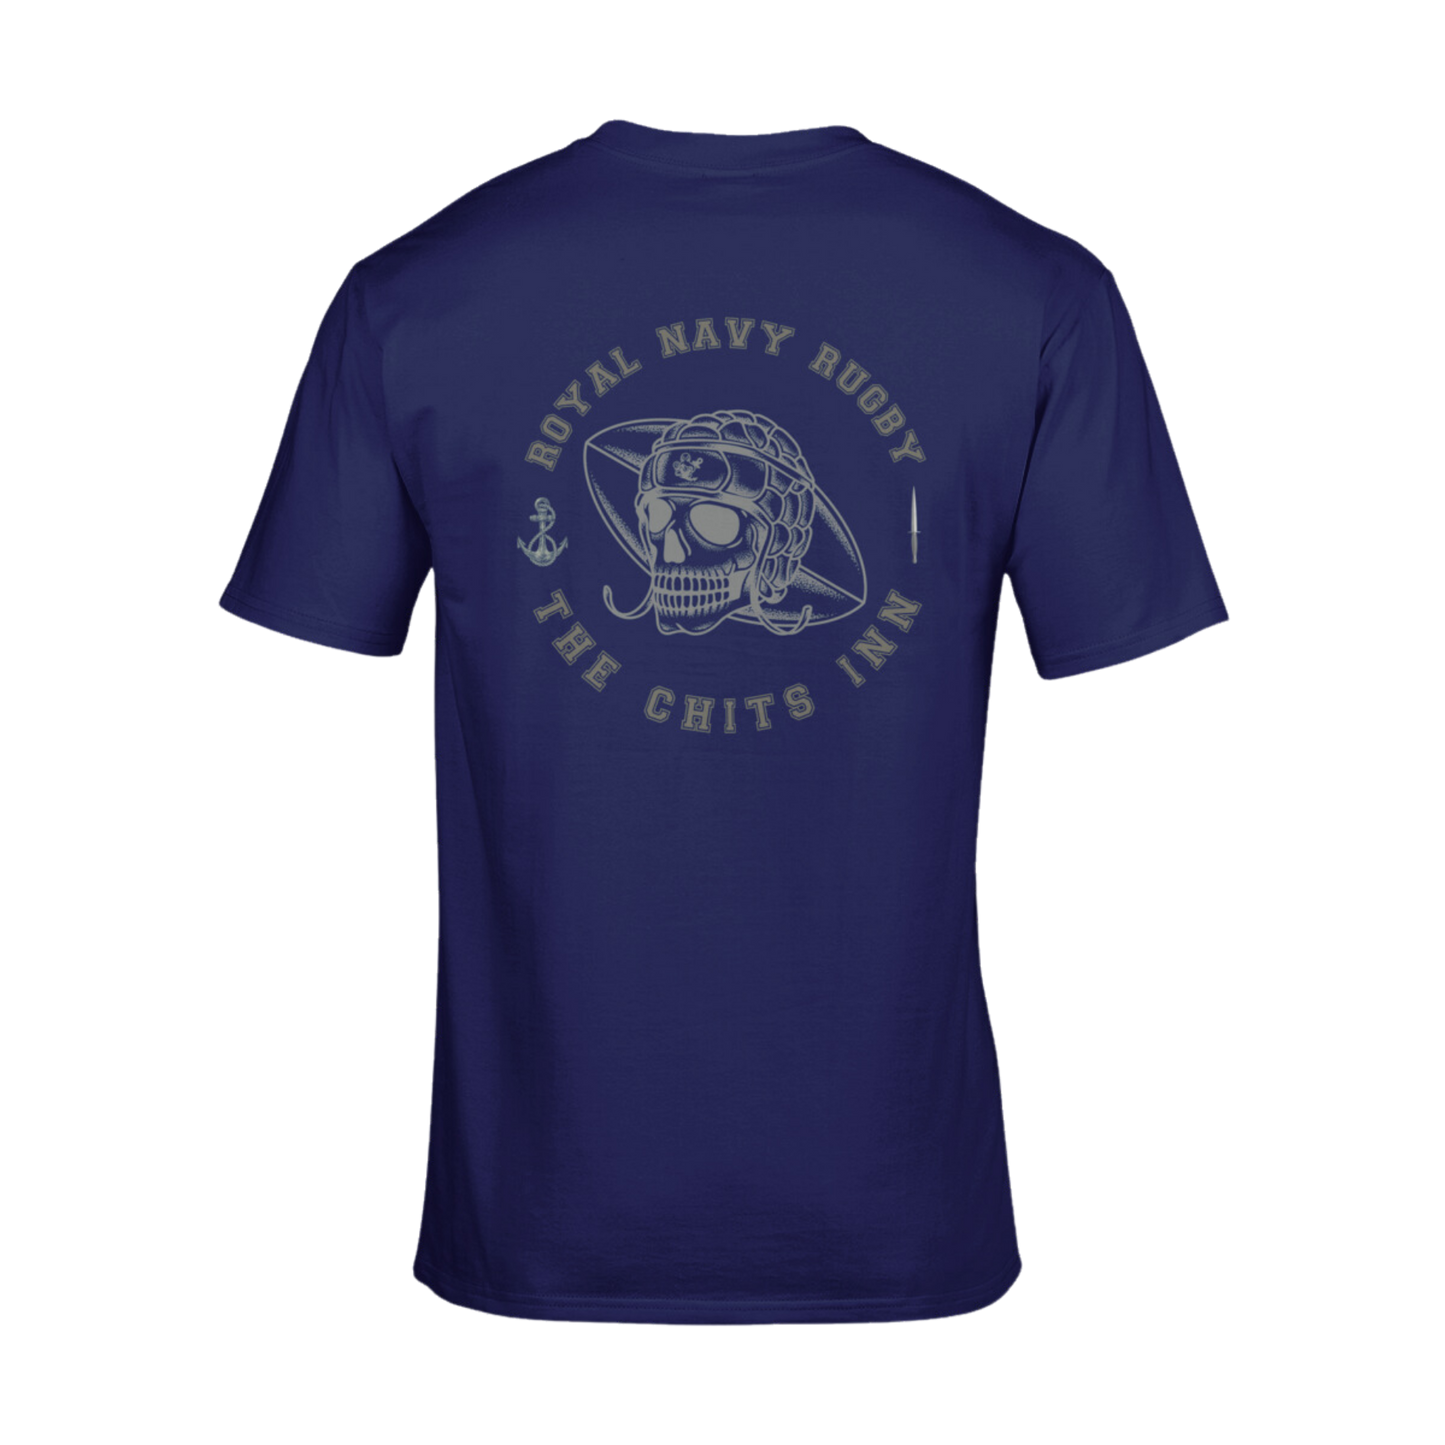 Royal Navy Rugby Supporters Tee